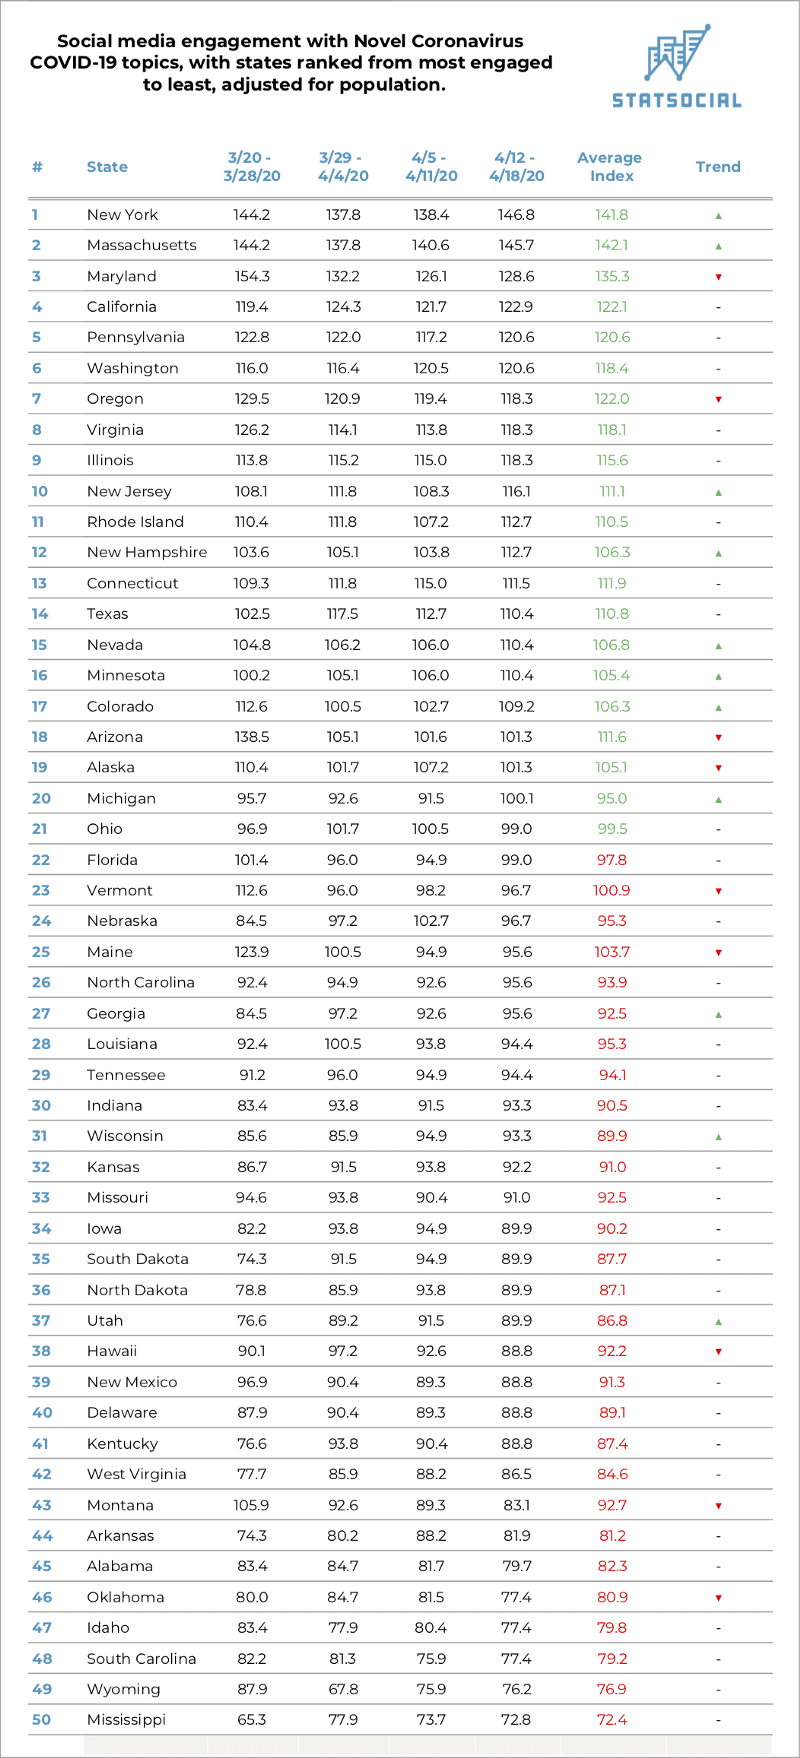 Week 4 — Which states are most engaged with online COVID-19 news? And who is trending up/down?